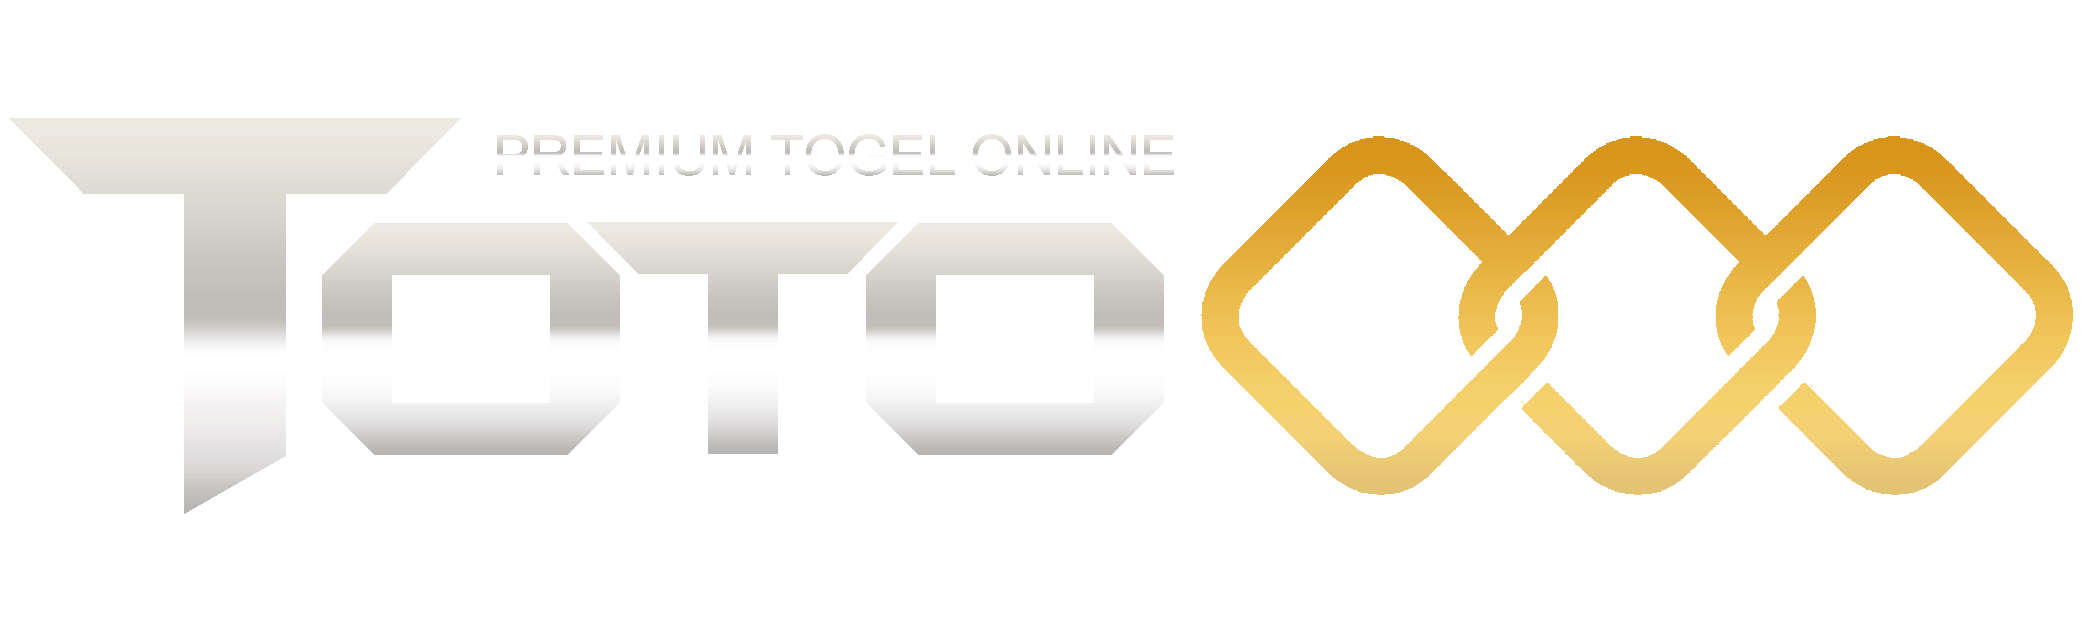 TOTO168